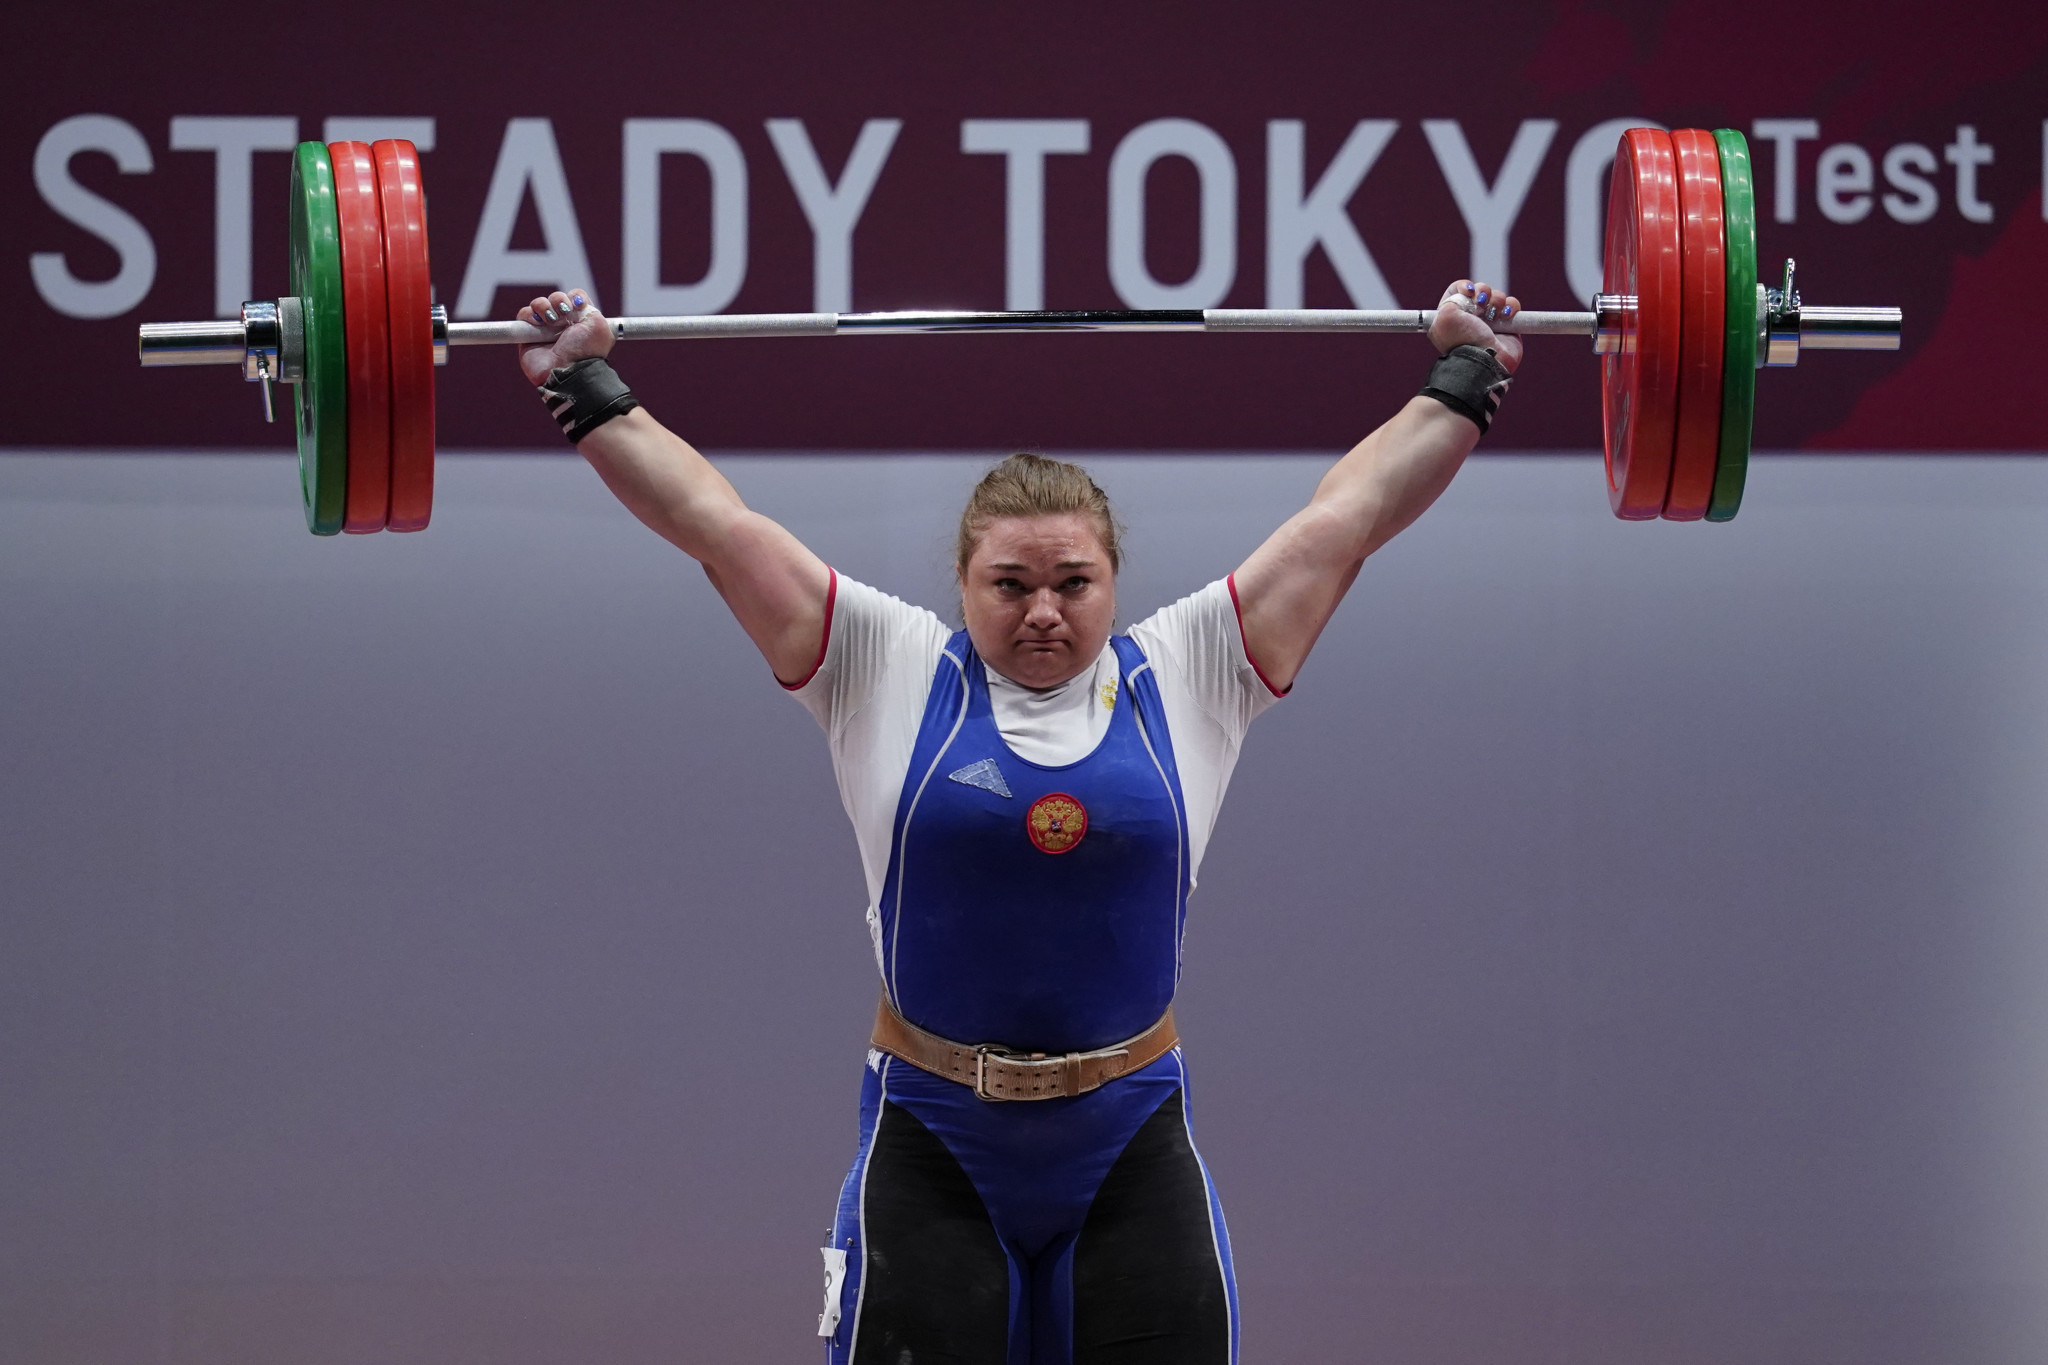 Tatiana Kashirina recently won gold at the CIS Games in Belarus ©Getty Images